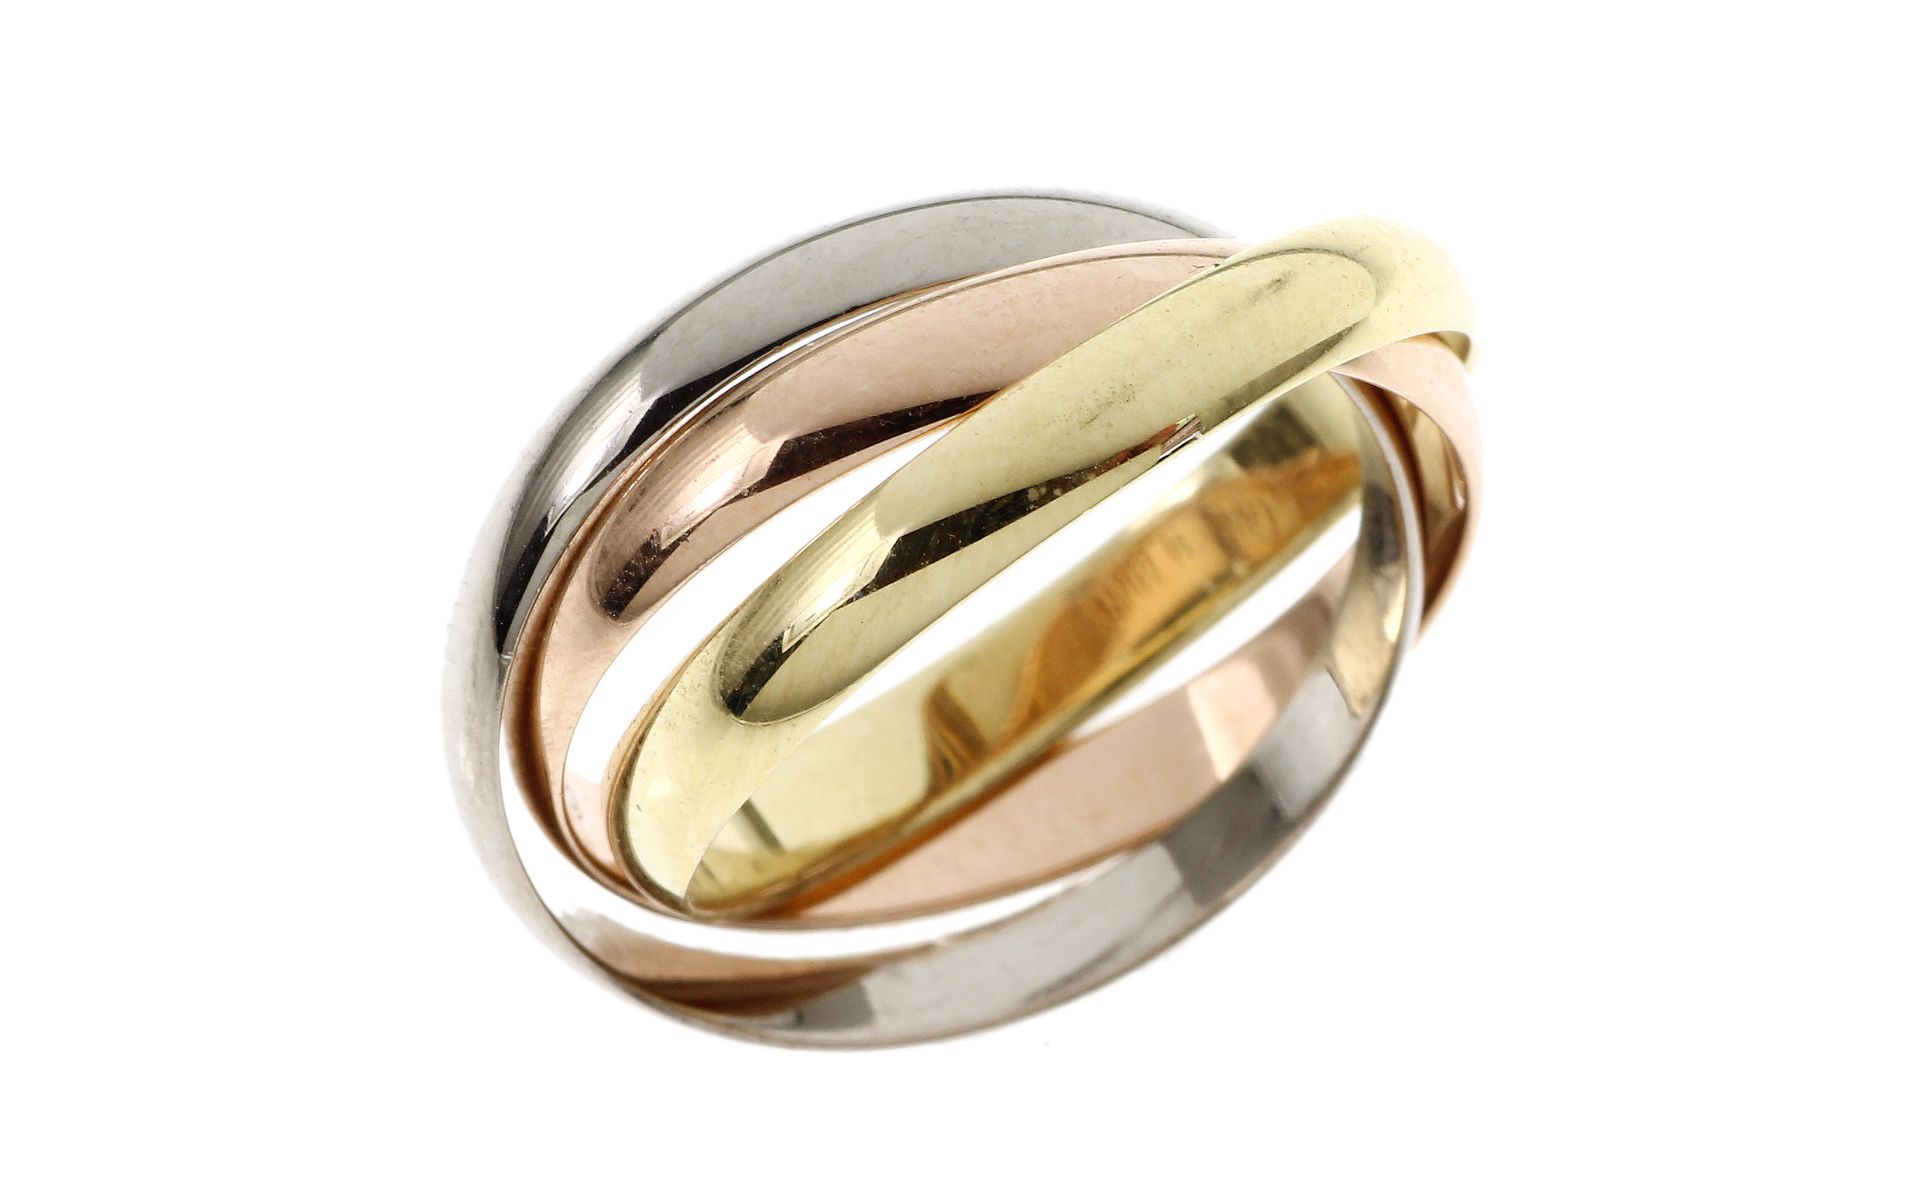 Cartier Ring 4.36g 750/- Gelbgold. Weissgold und Rotgold. Ringgroesse ca. 51